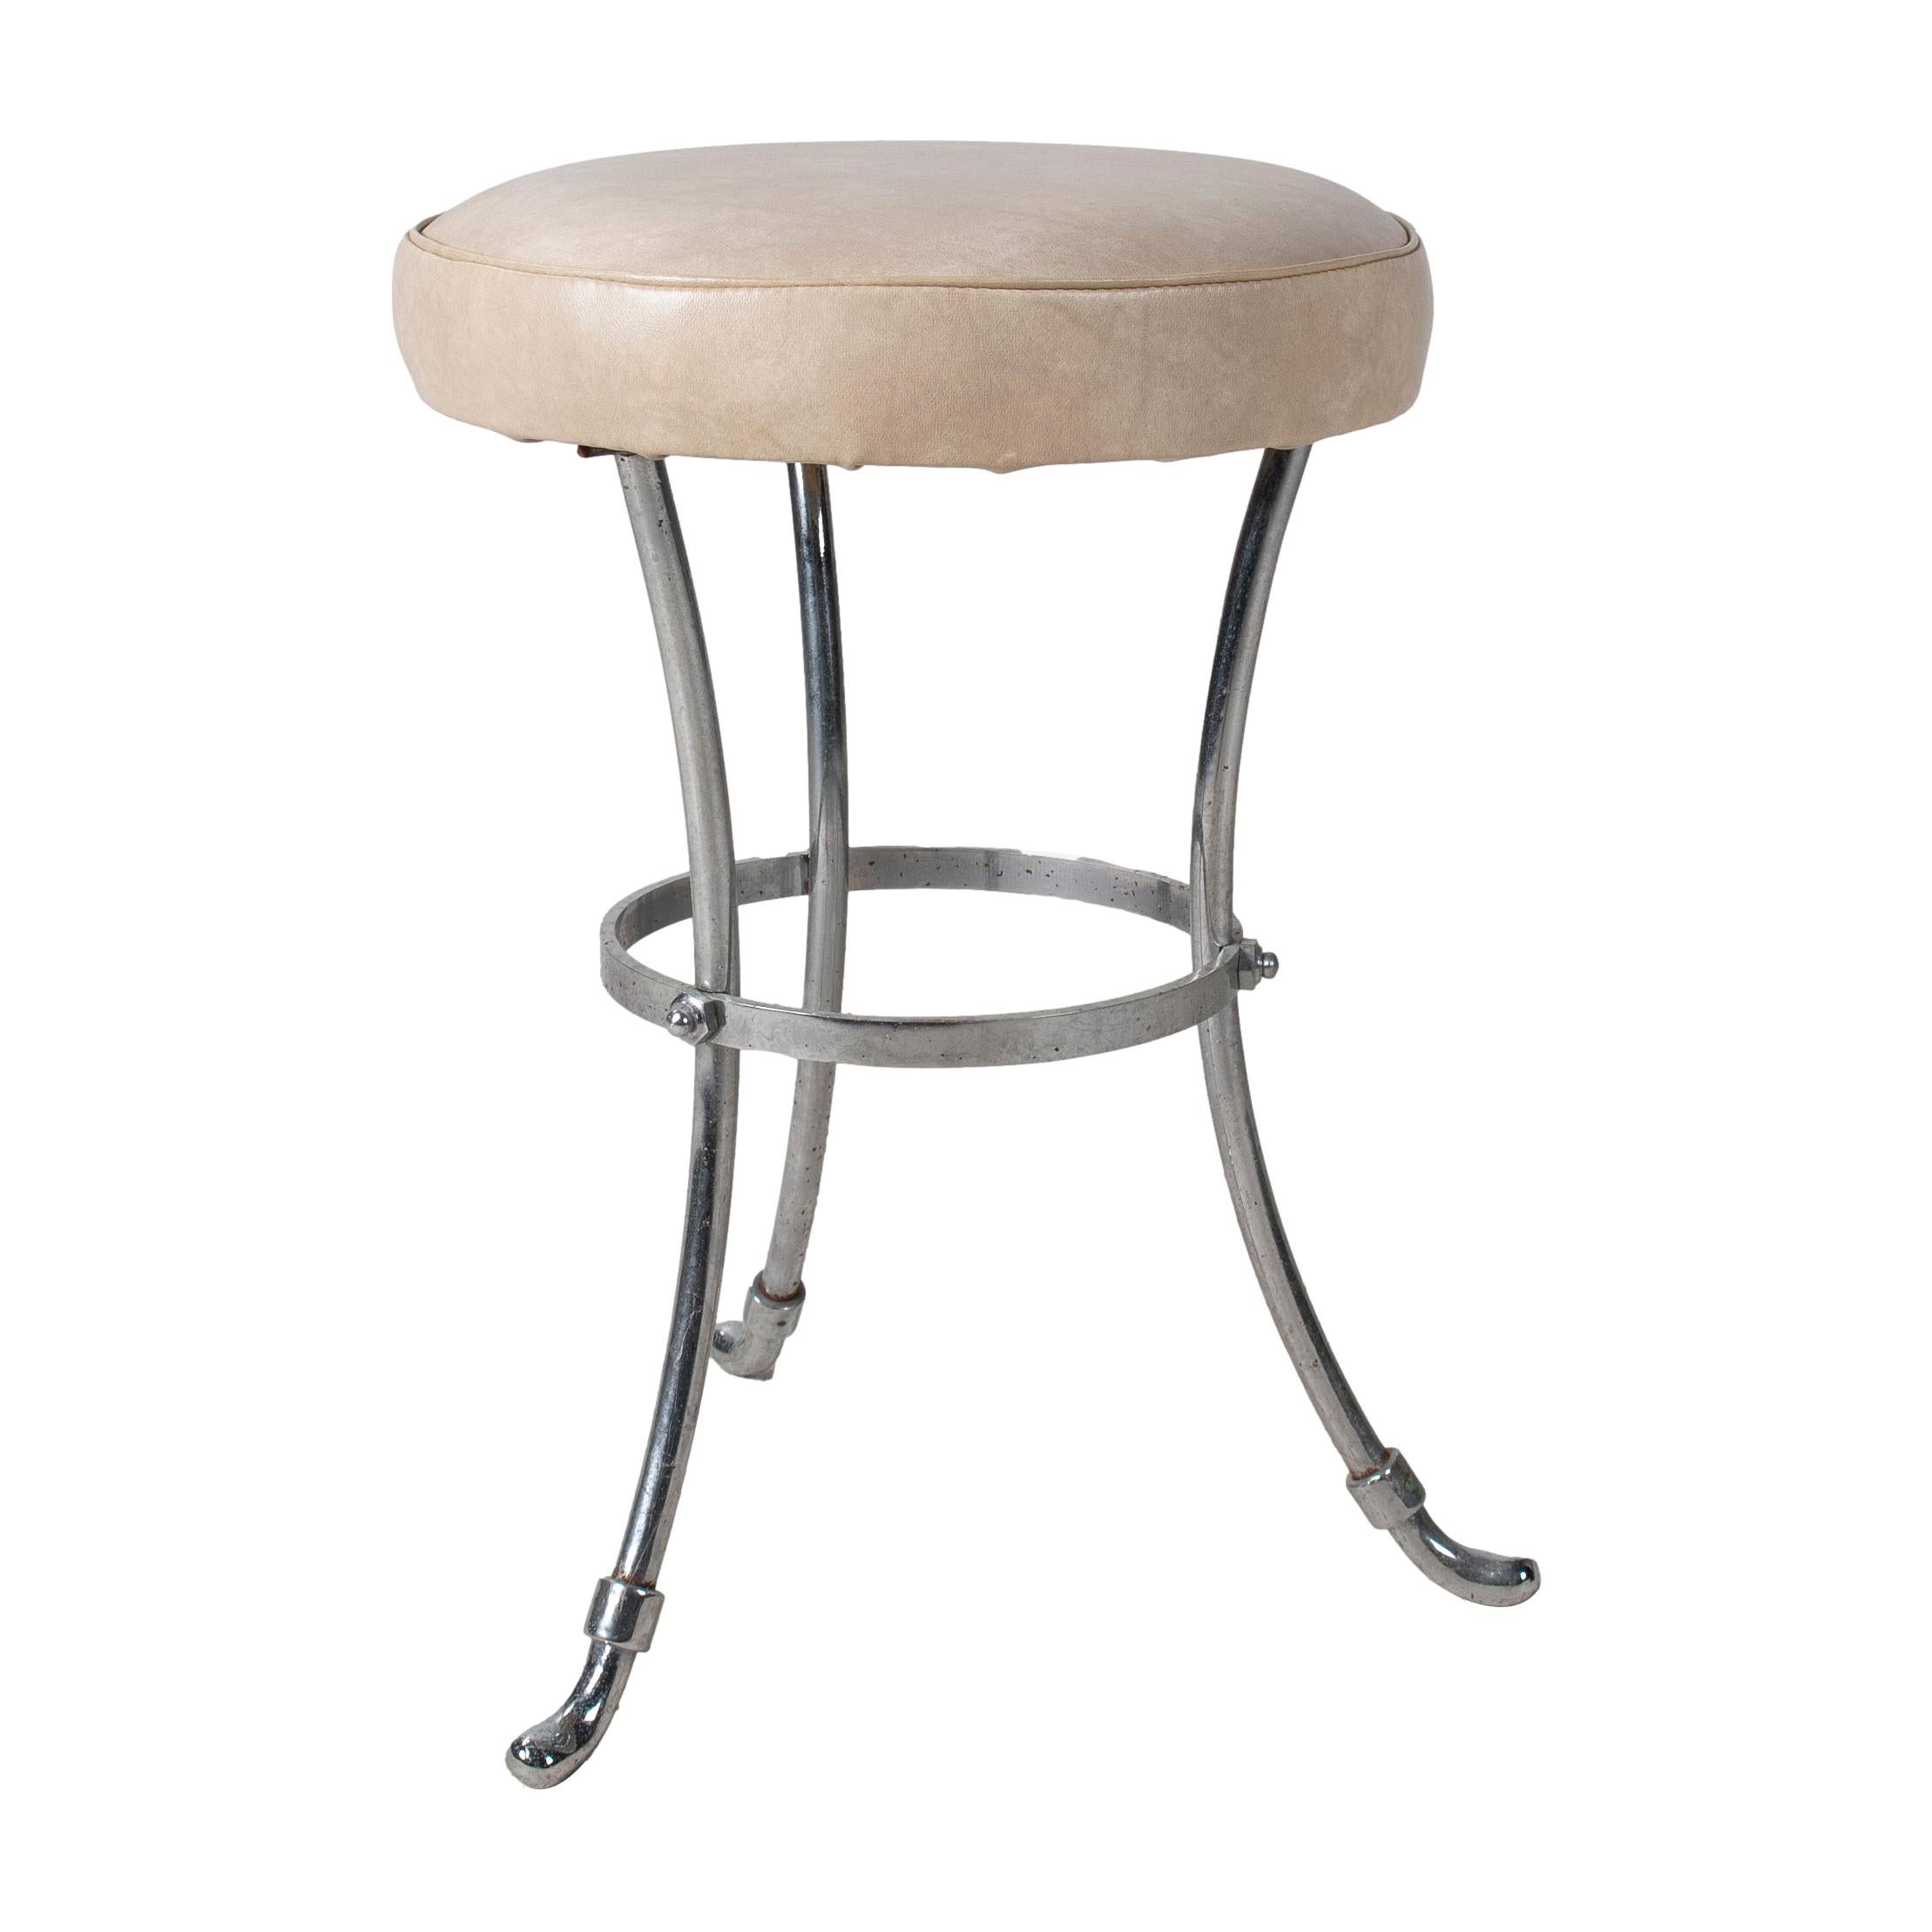 1950s French Faux Leather Steel Stool